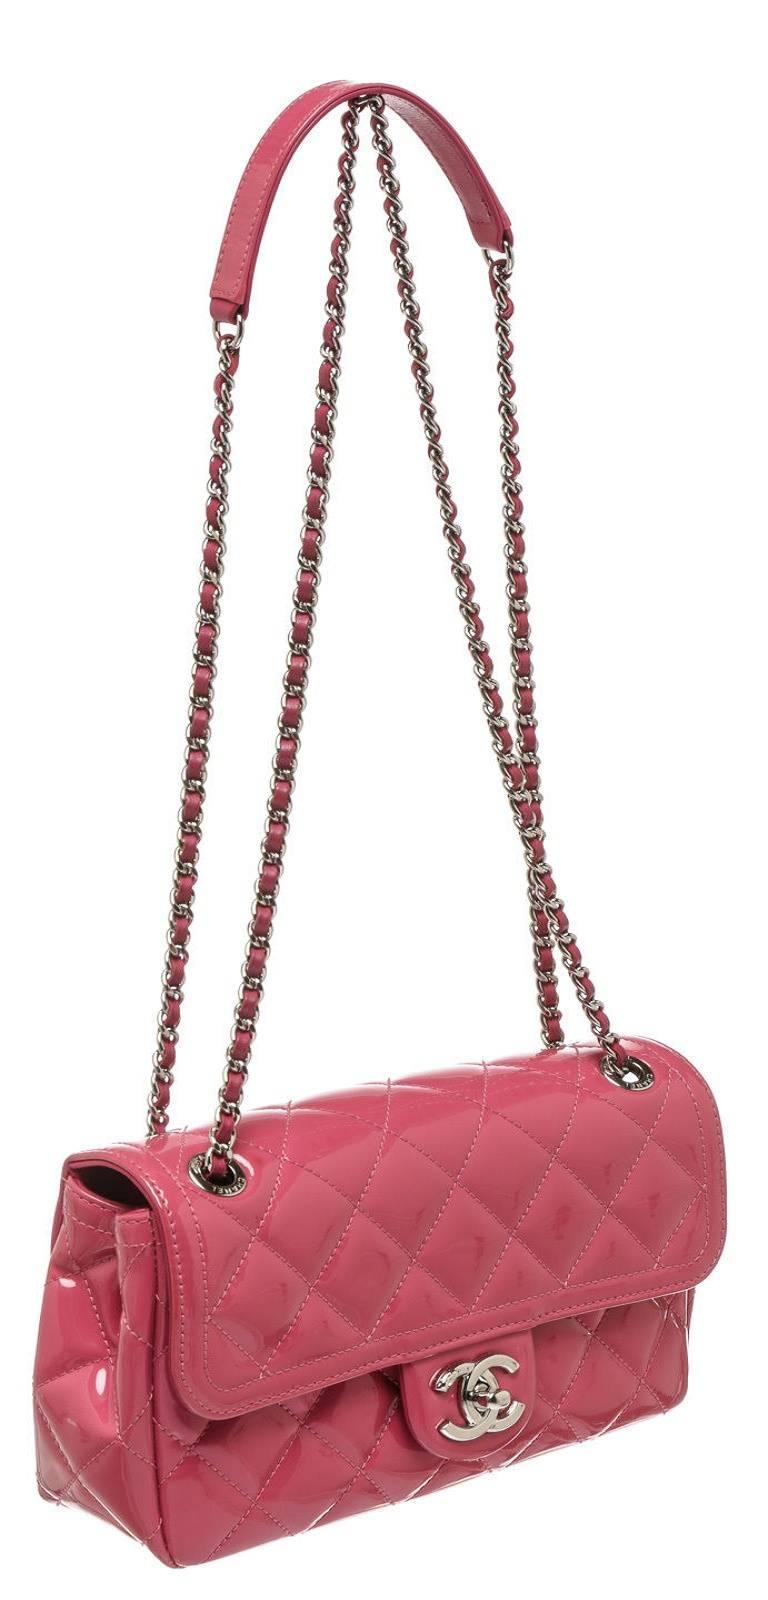 Women's Chanel Pink Quilted Patent Leather Flap Shoulder Handbag For Sale